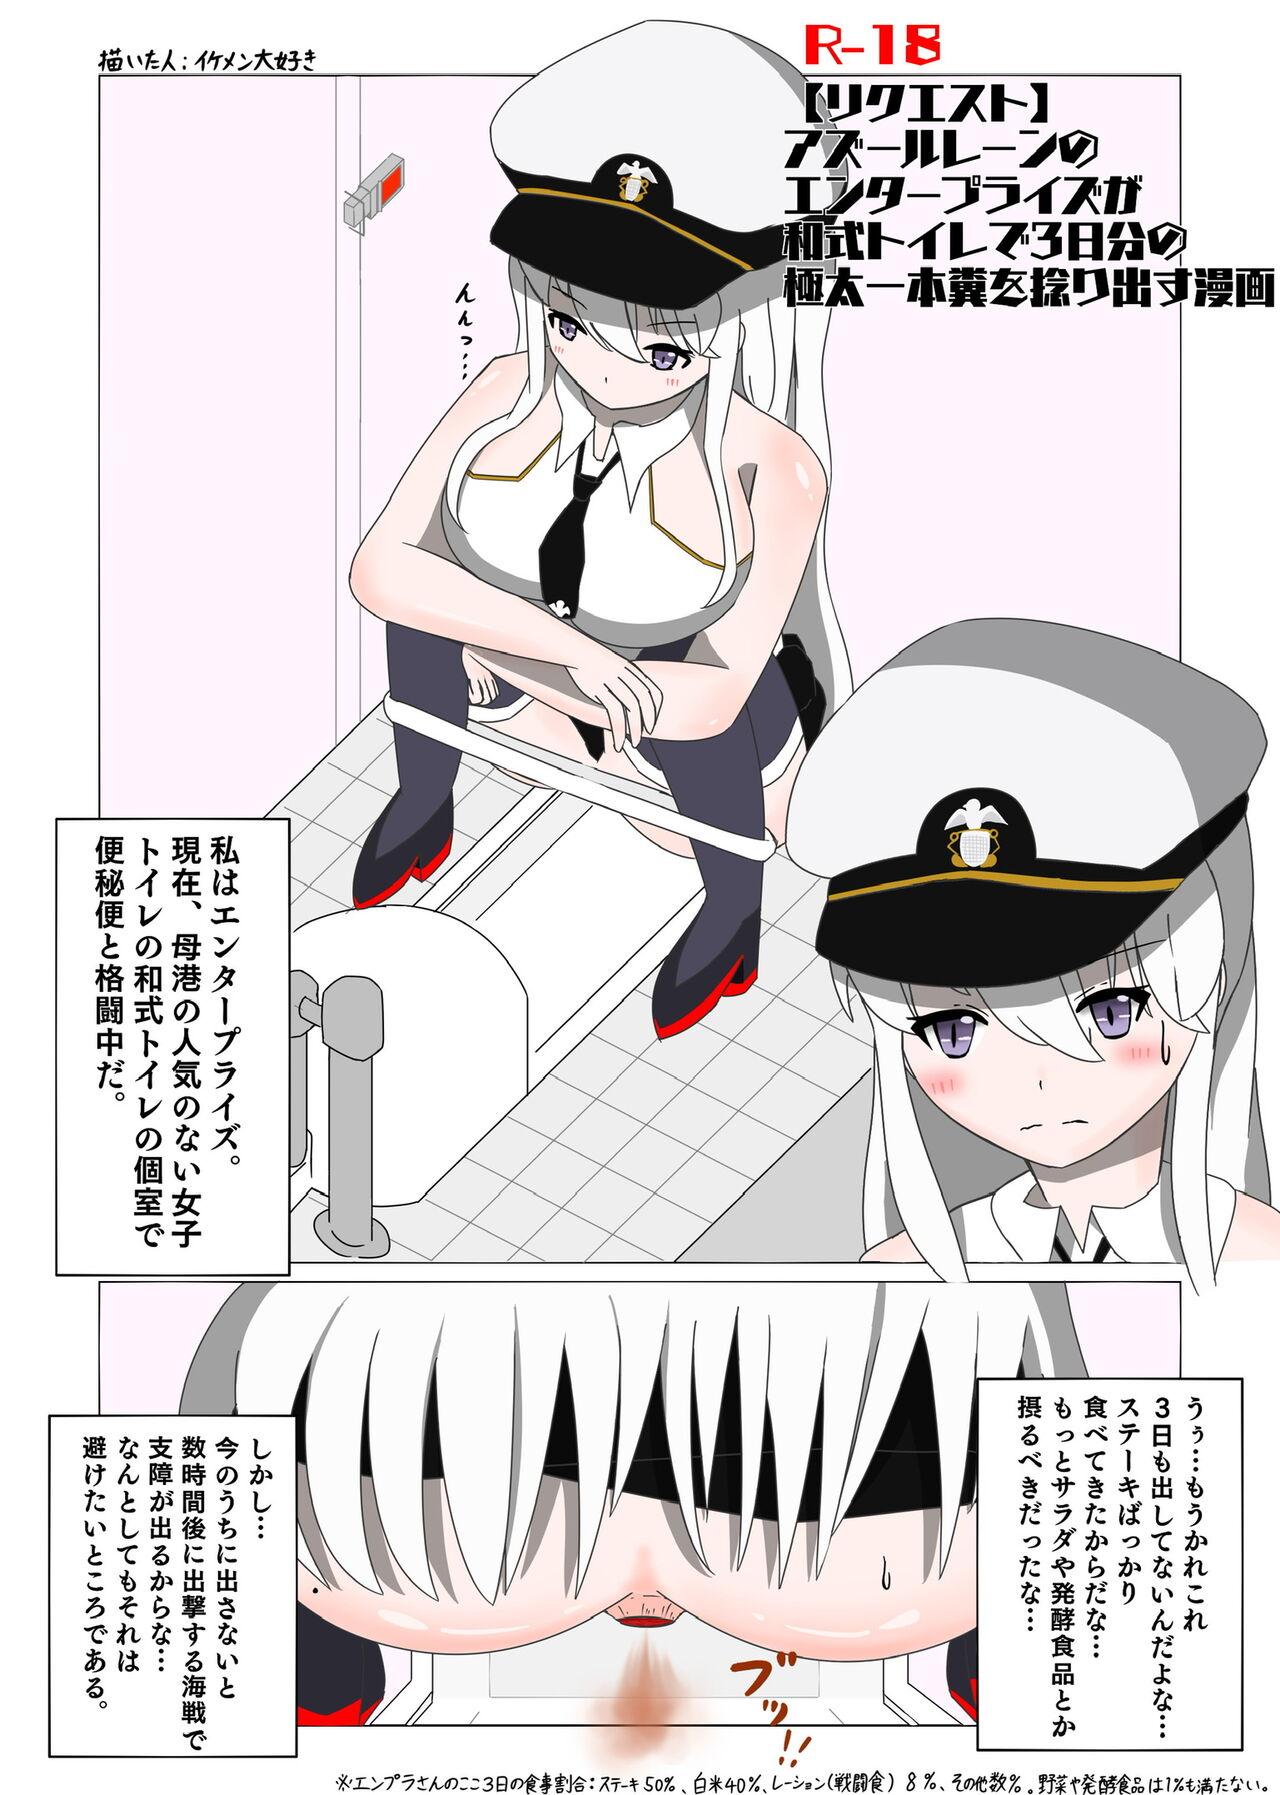 A manga in which Enterprise relieves 3 days' worth of poop in a Japanese-style toilet 0